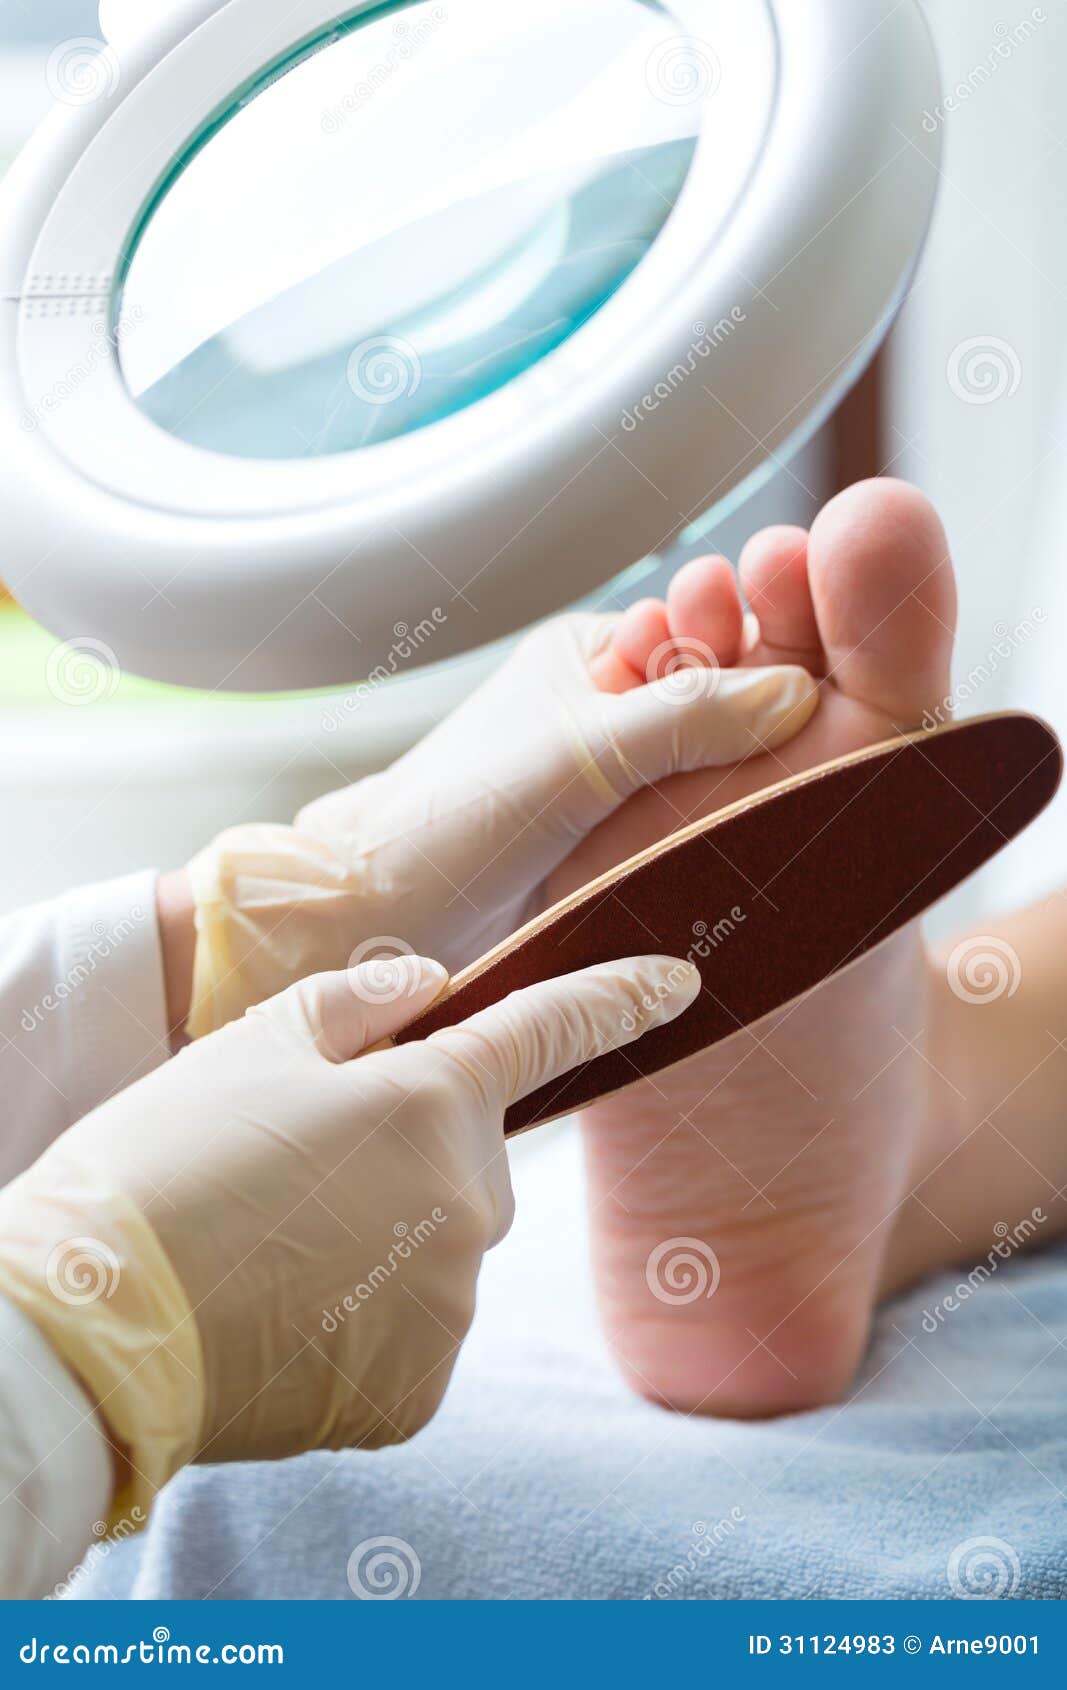 woman receiving podiatry treatment in day spa